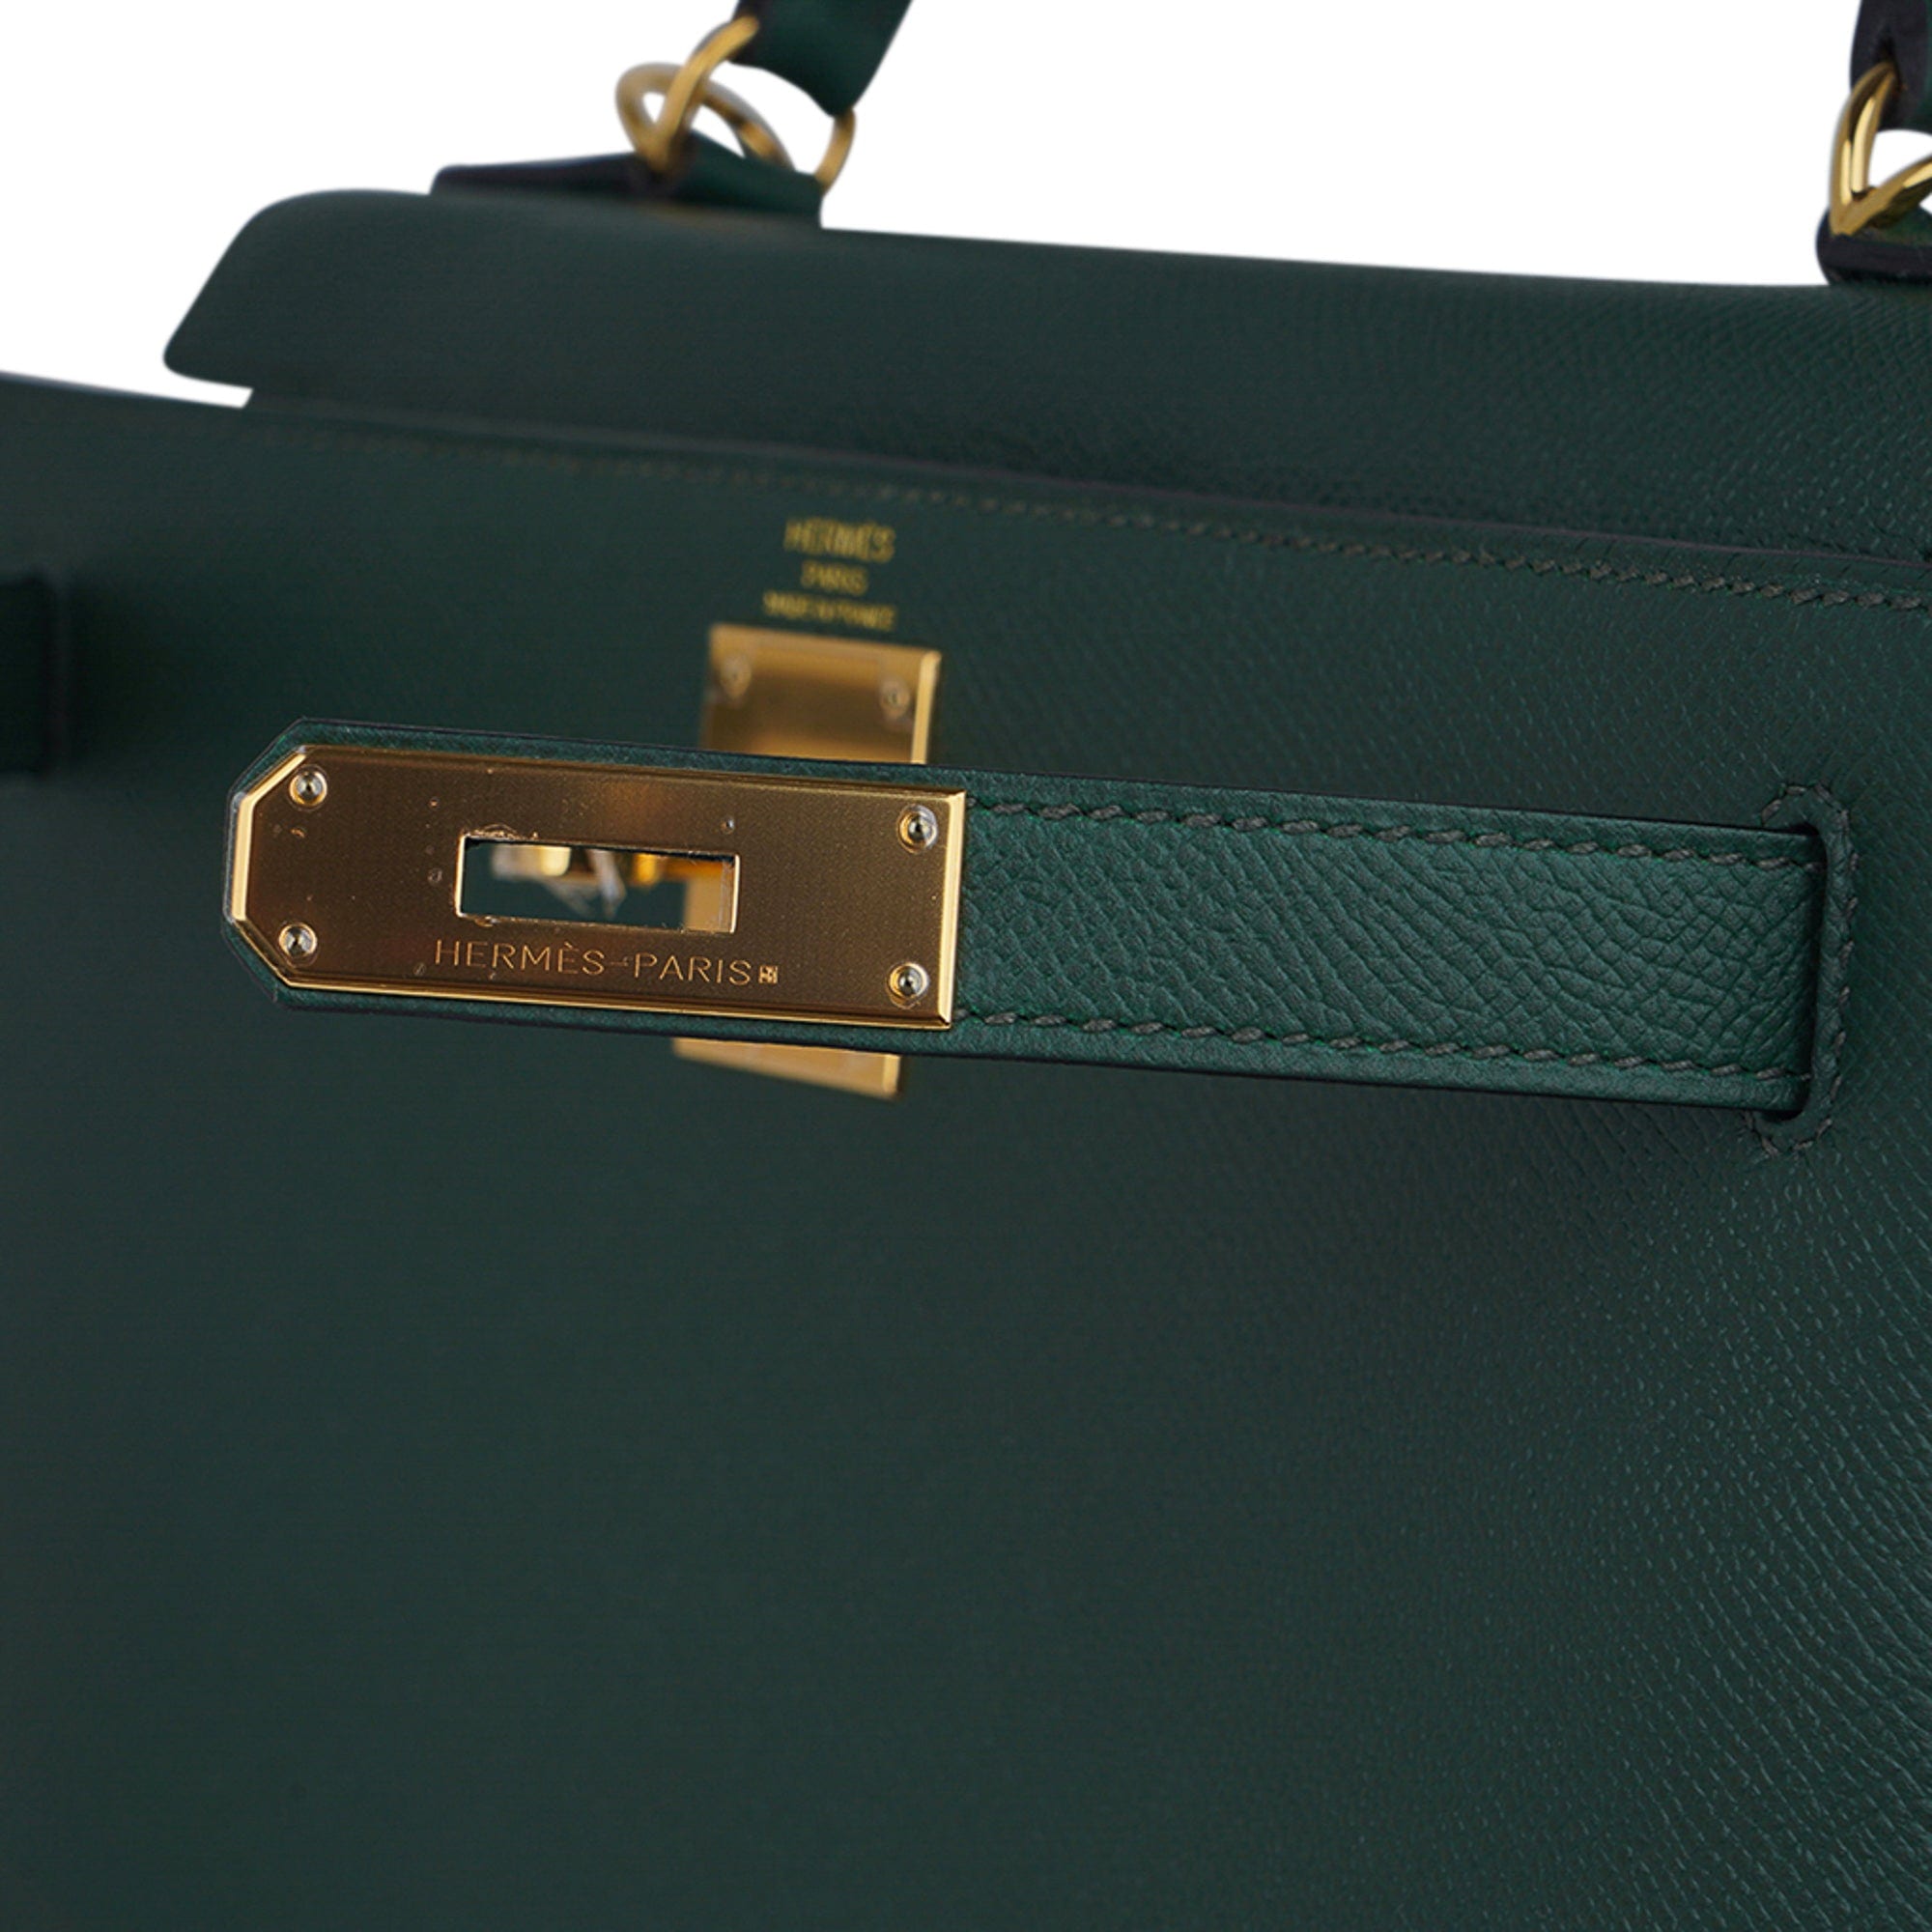 Hermes Kelly Sellier 28 Bag Vert Anglais Epsom Leather with Gold